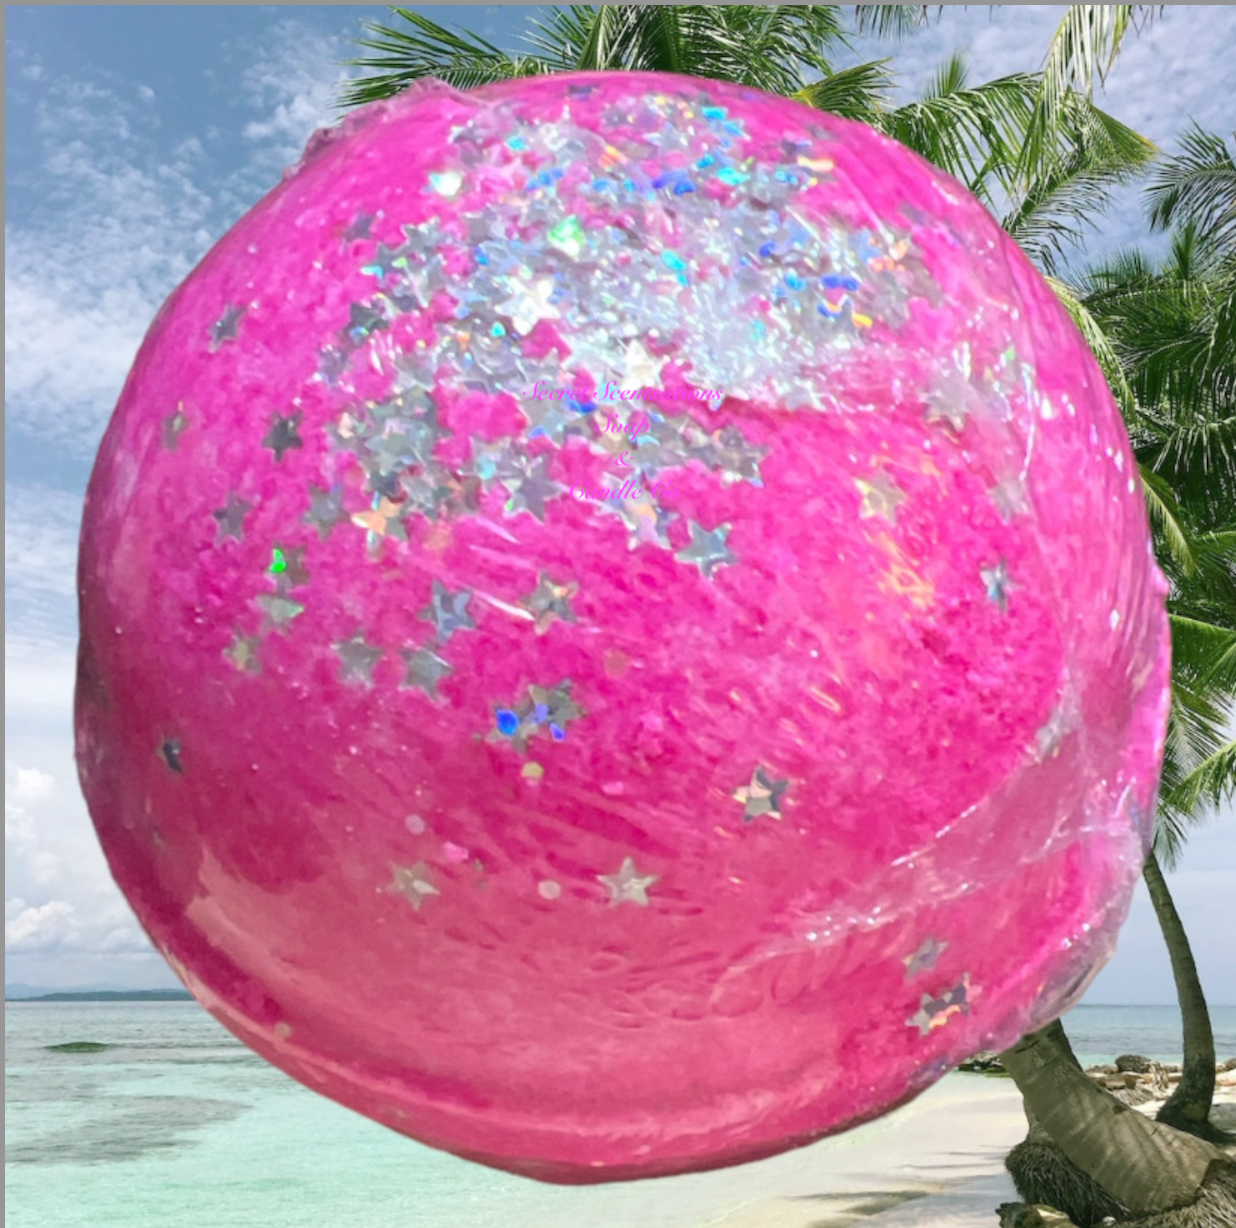 Pink with Biodegradable Stars Scented with Caribbean Escape. Mica natural color. Essential Castor Oil. Vitamin E Essential Oil and Shorea Butter. Essential Avocado Oil. Eatible star glitter on top. Large ball shape 7 inches round.. Bath Bombs